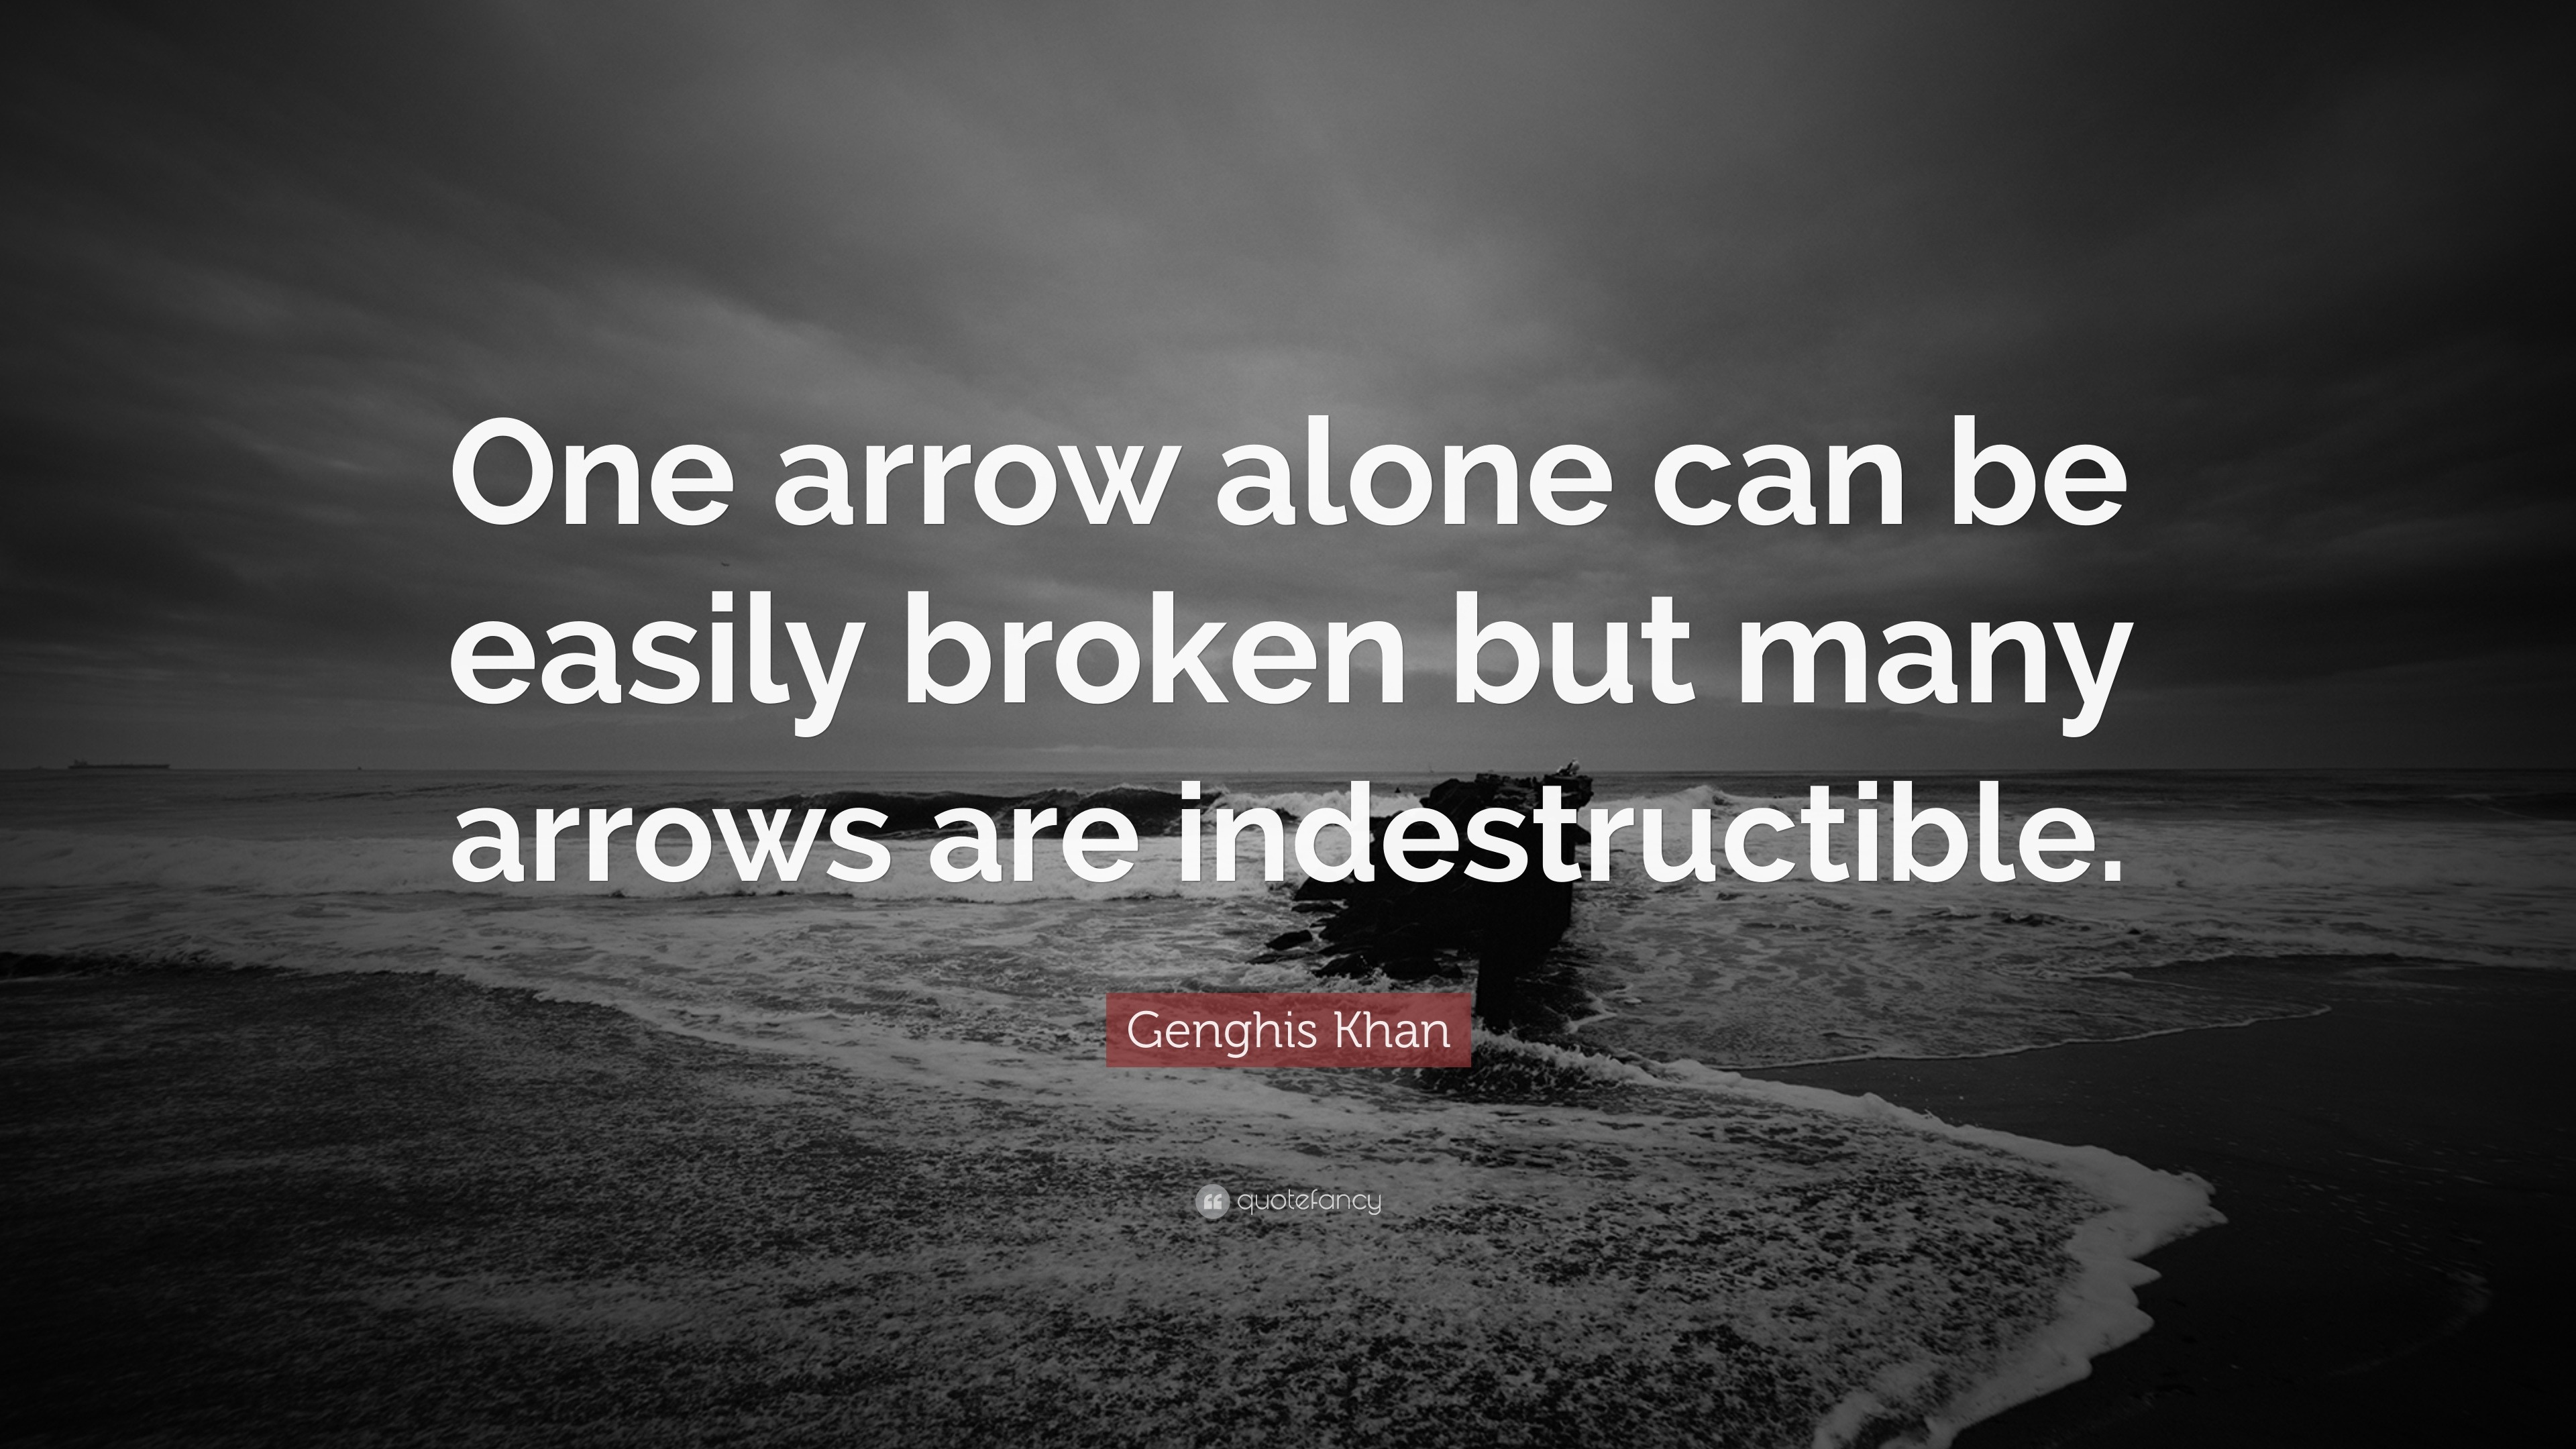 Genghis Khan Quote: “One arrow alone can be easily broken but many